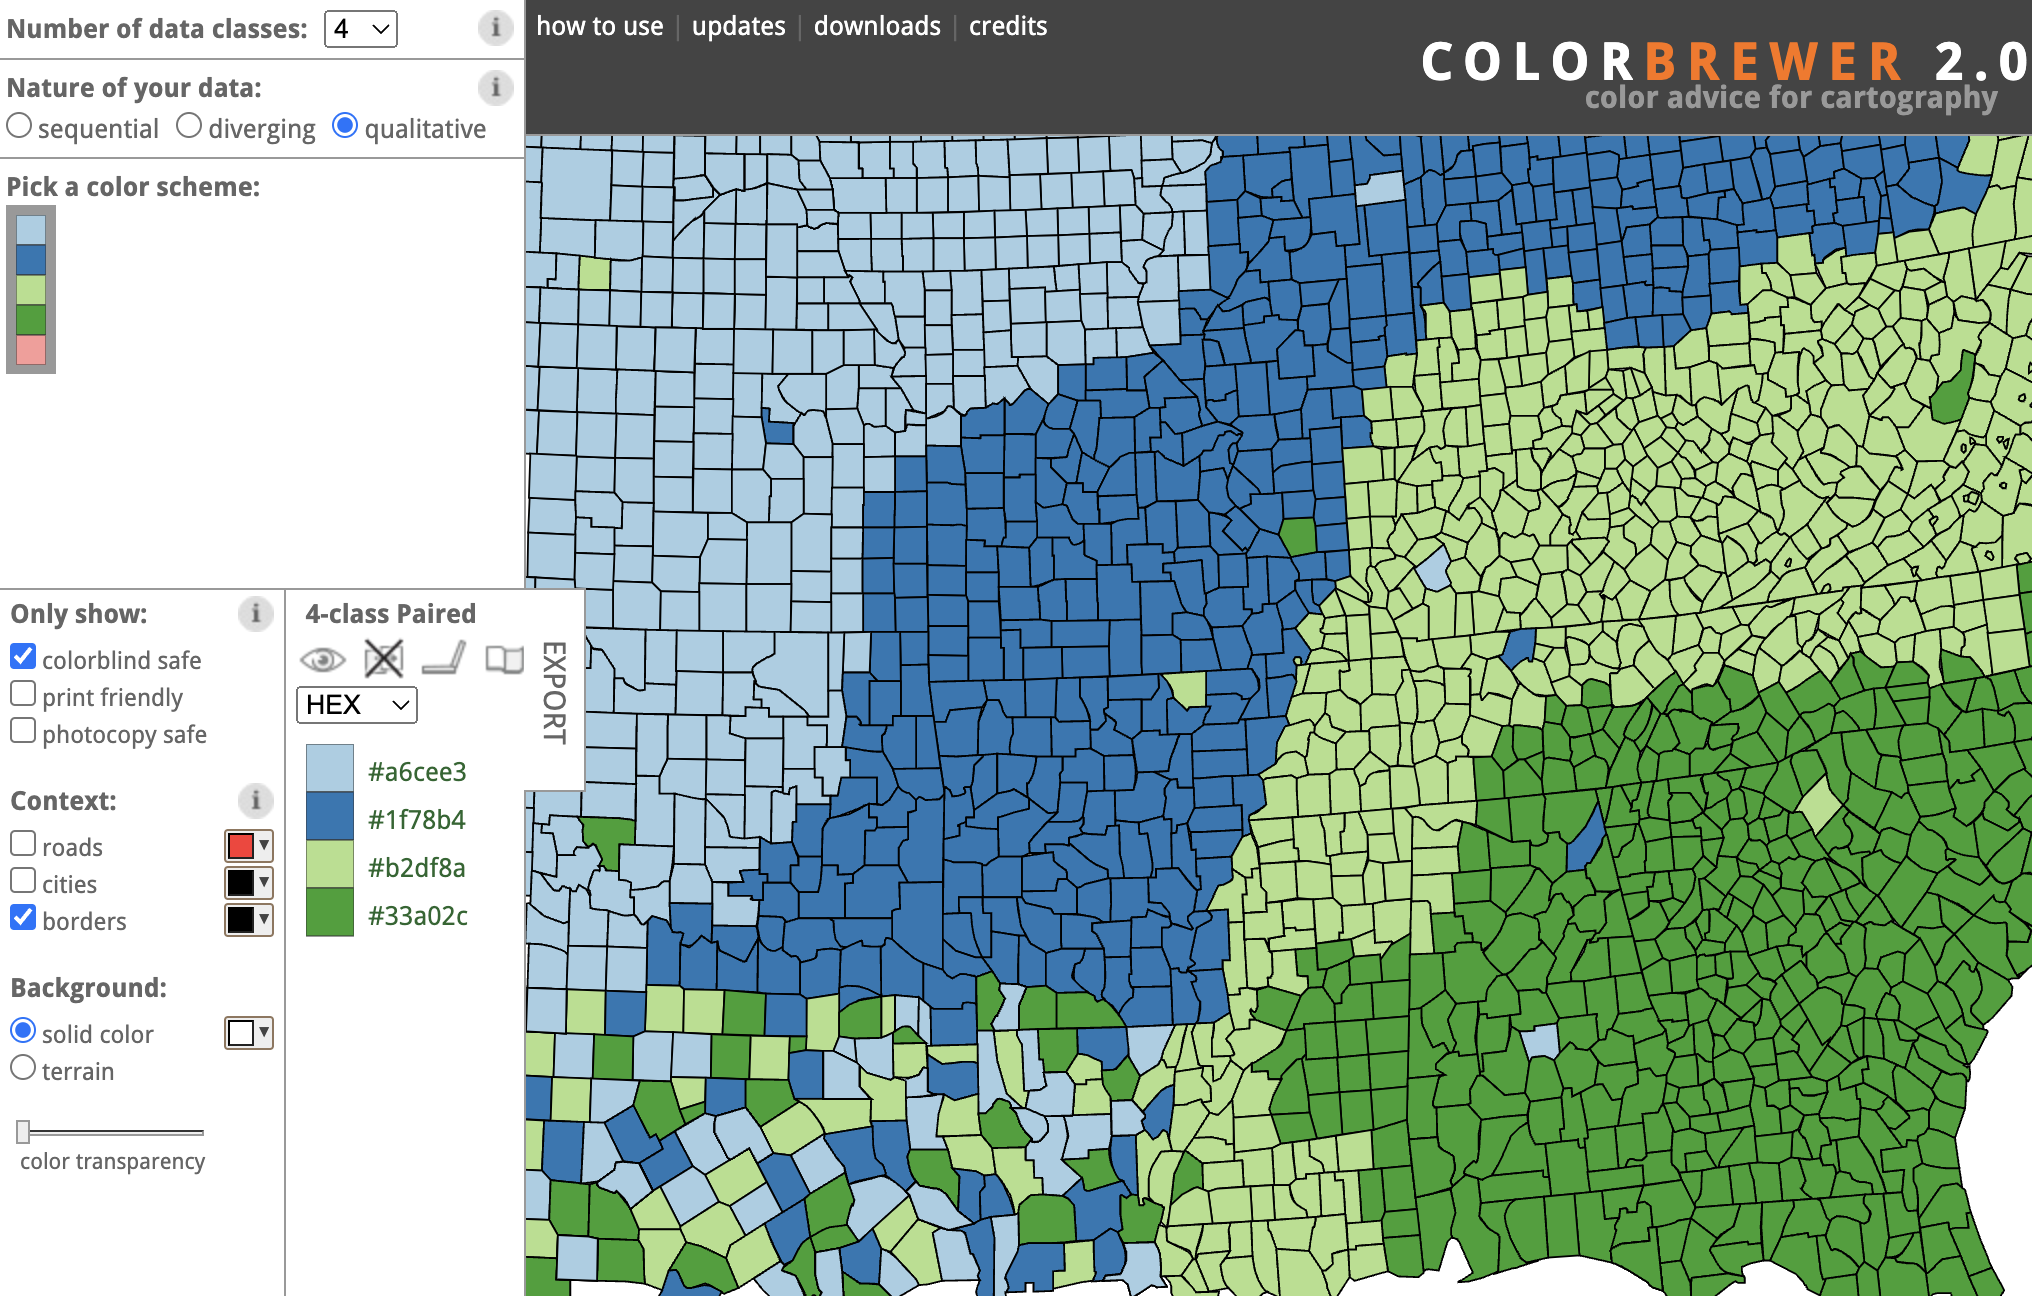 The ColorBrewer interface showing a colorblind safe colour palette